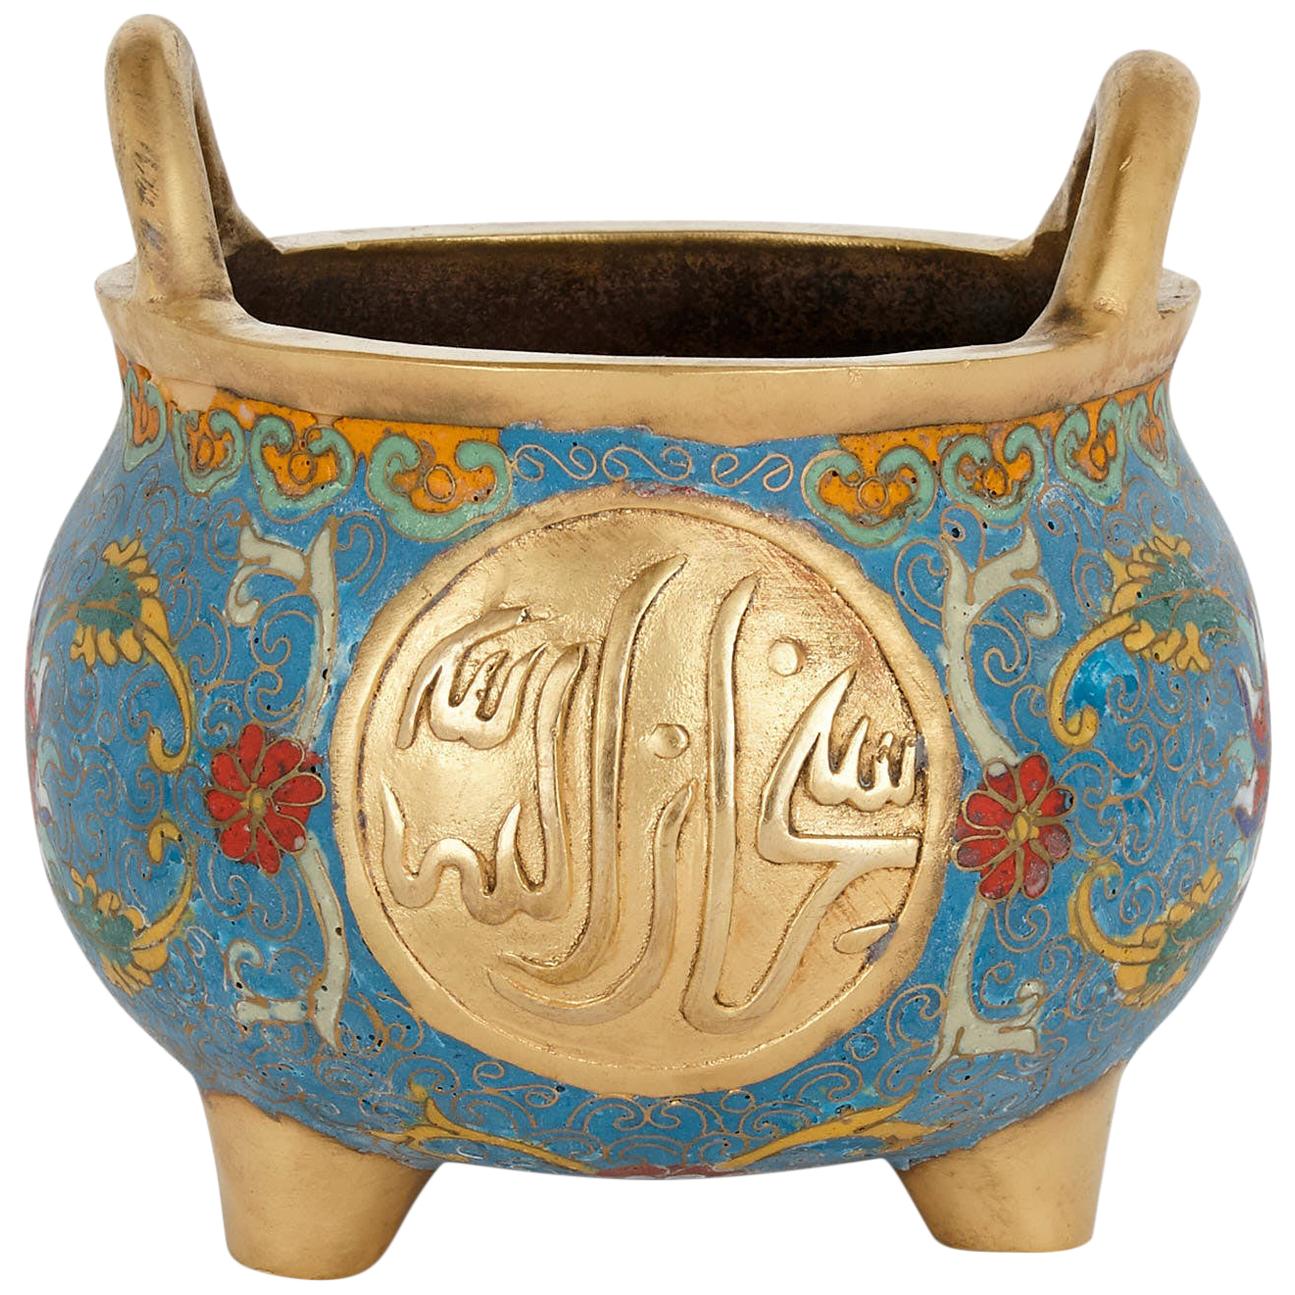 Chinese Floral Islamic Style Cloisonné Enamel and Ormolu Vase